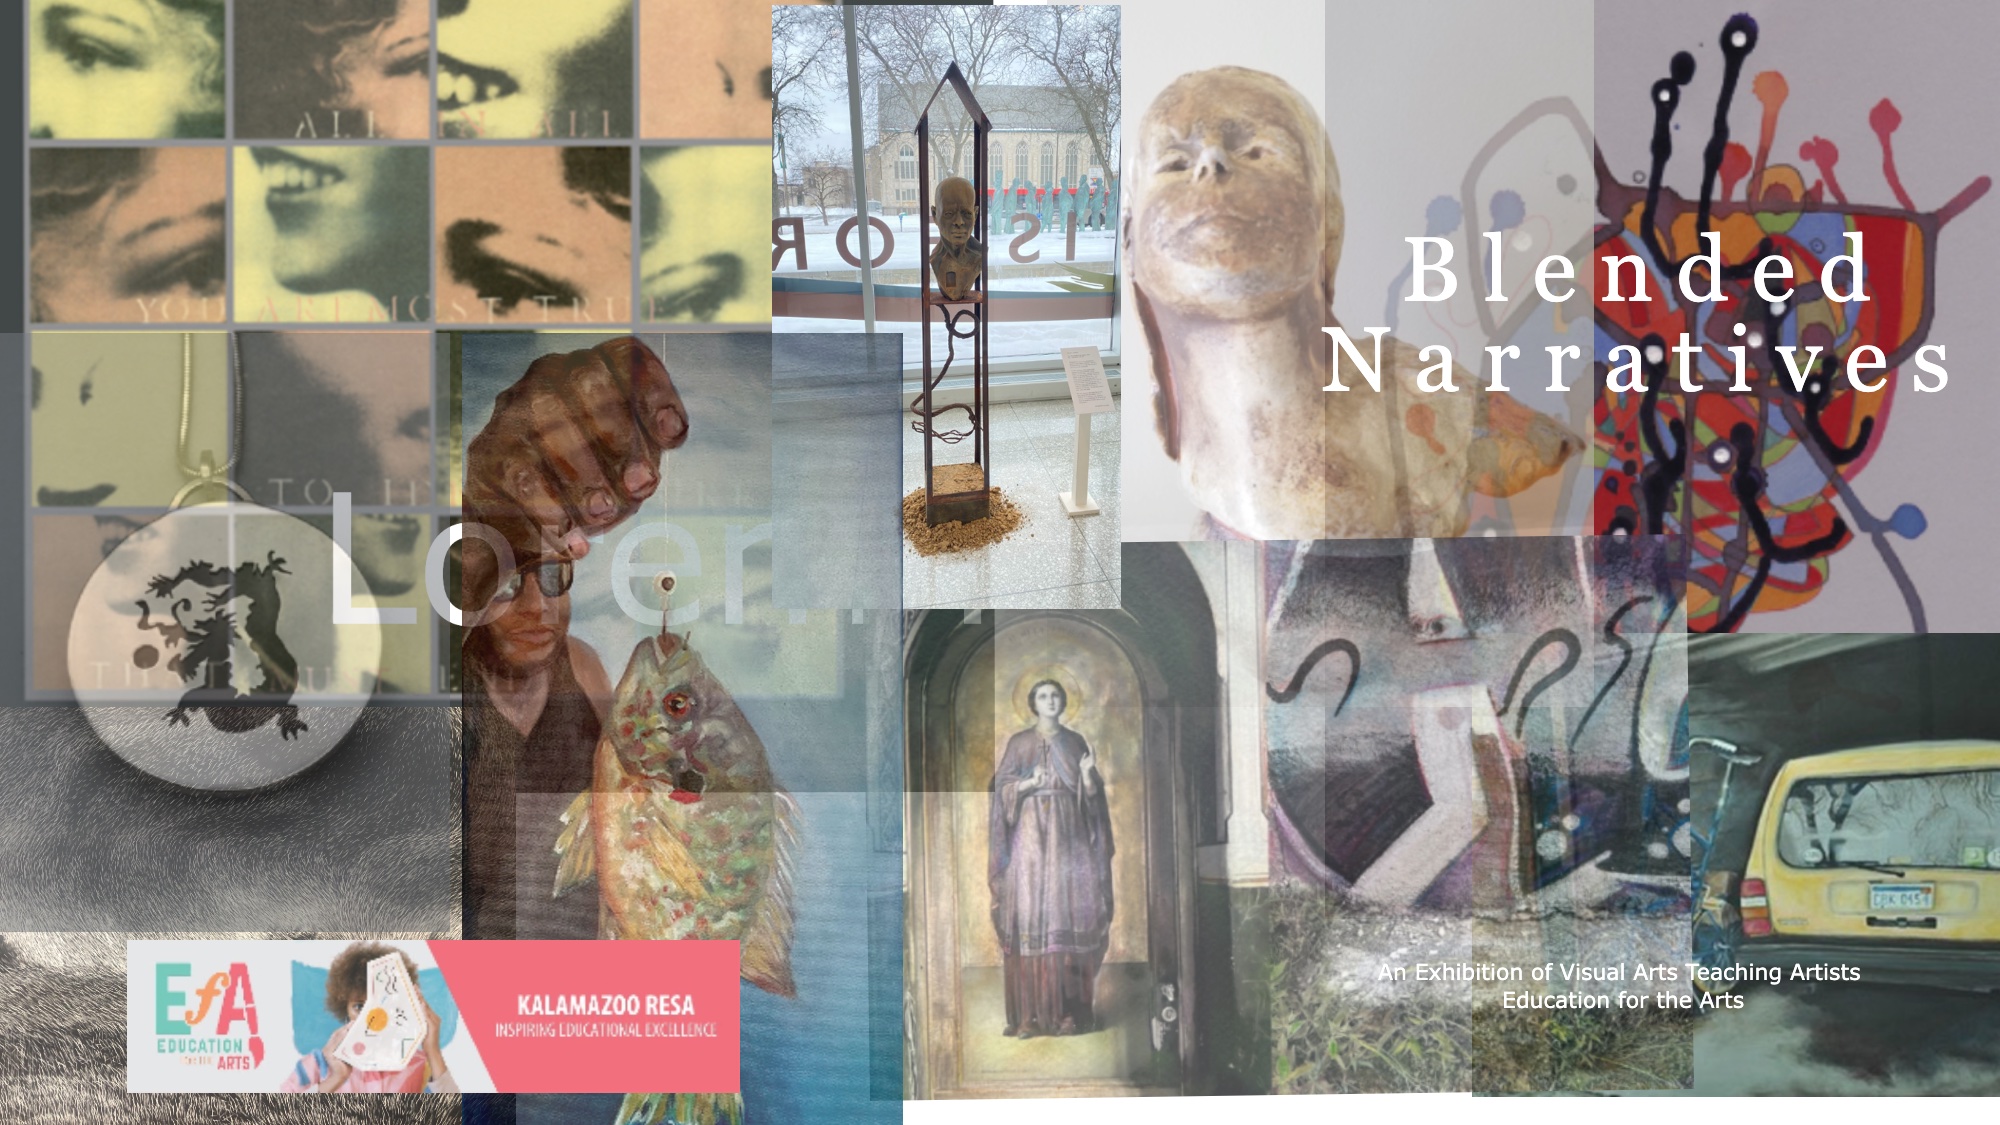 Blended Narratives, exhibition of the work of EFA Teaching Artists, Park Trades Center and Epic Center Gallery